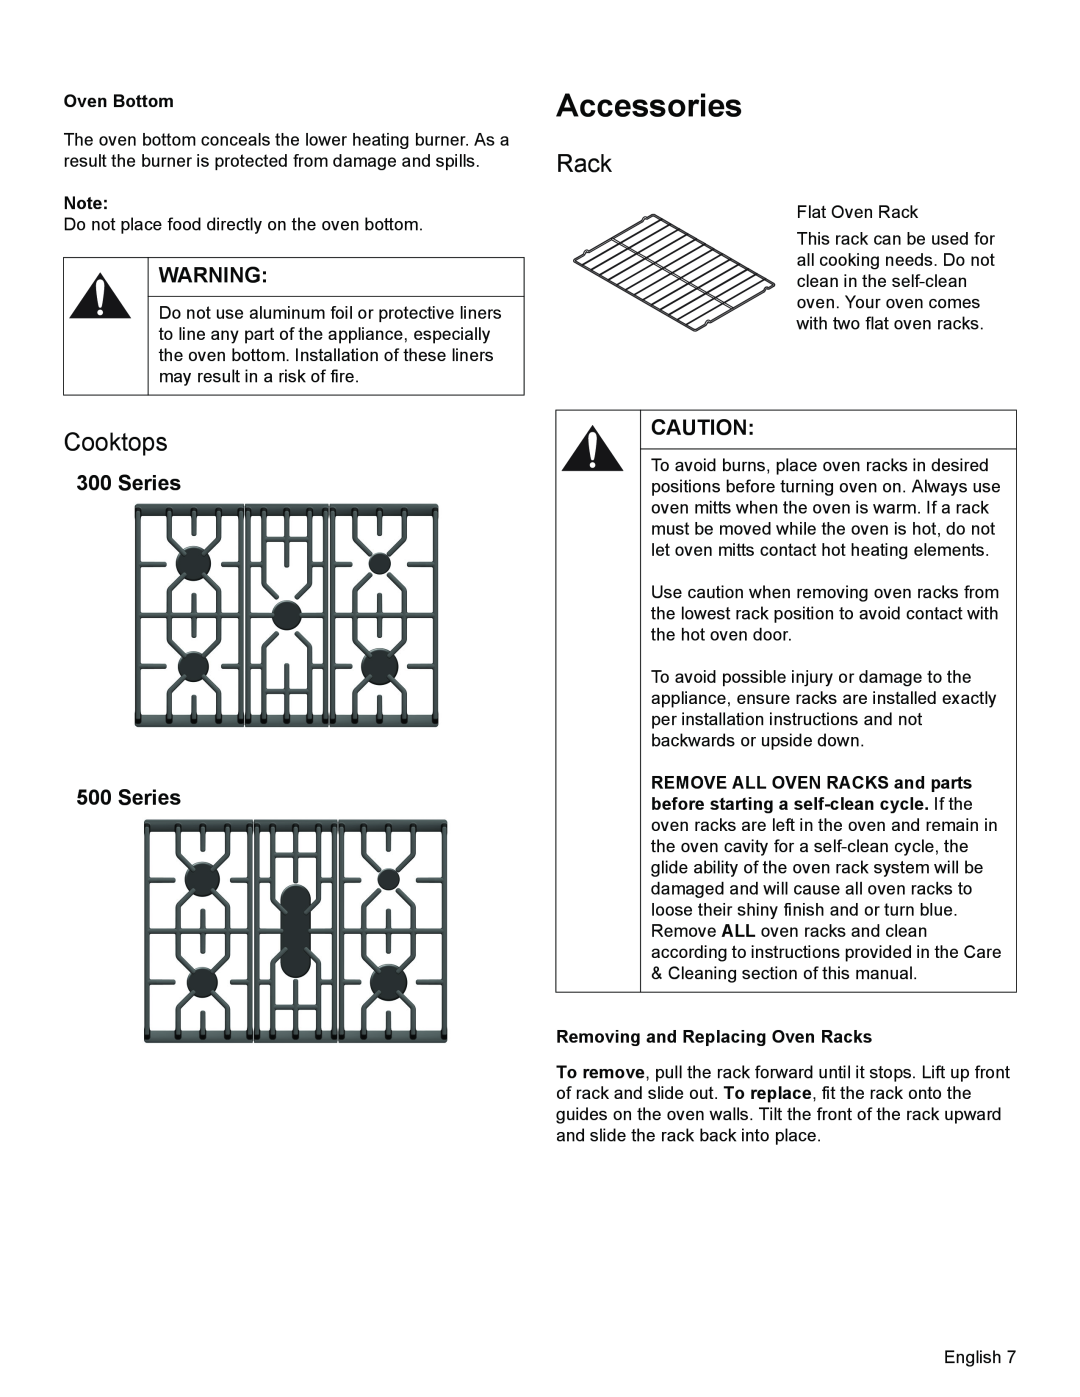 Bosch Appliances HGS3053UC manual Accessories, Cooktops, Oven Bottom, Removing and Replacing Oven Racks 